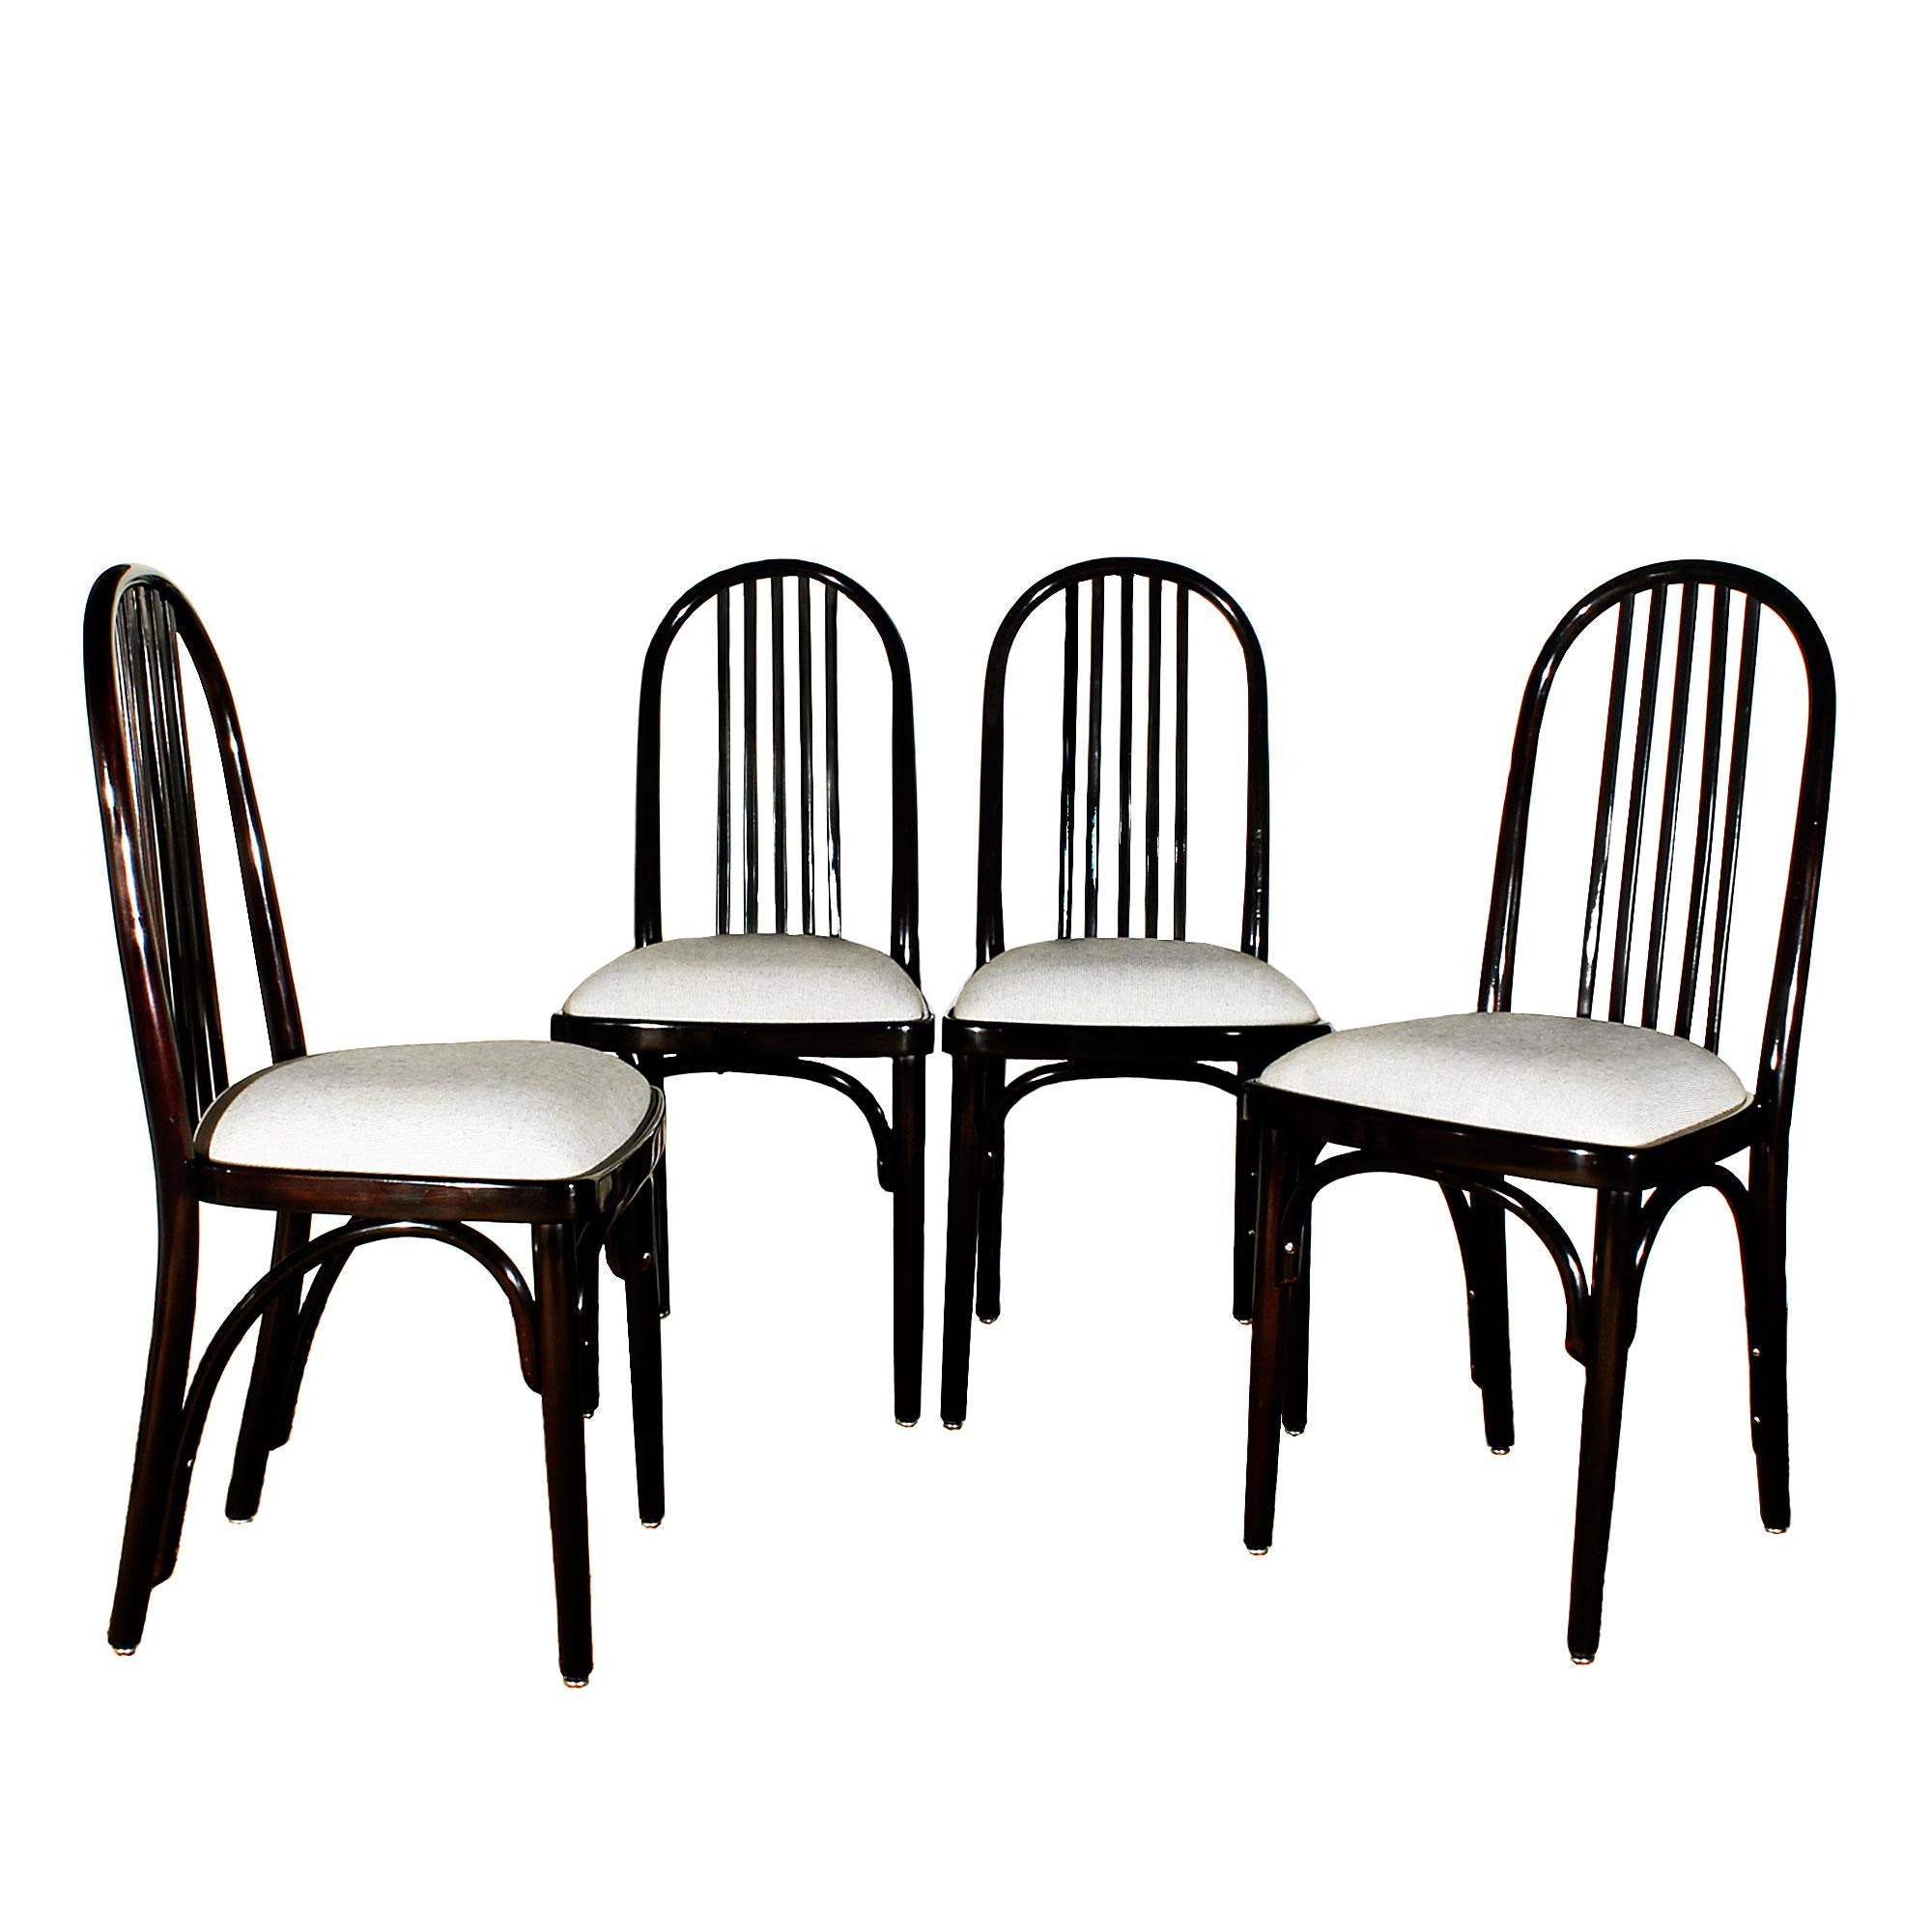 Set of eight bistro chairs, completely restored, French polish, mottled greige cotton upholstery.
Model 639.
Attributed to Josef Hoffmann.
Thonet Fabrique' en Tchecoslovaquie (label on some chairs).
Czechoslovakia, 1918-1920.